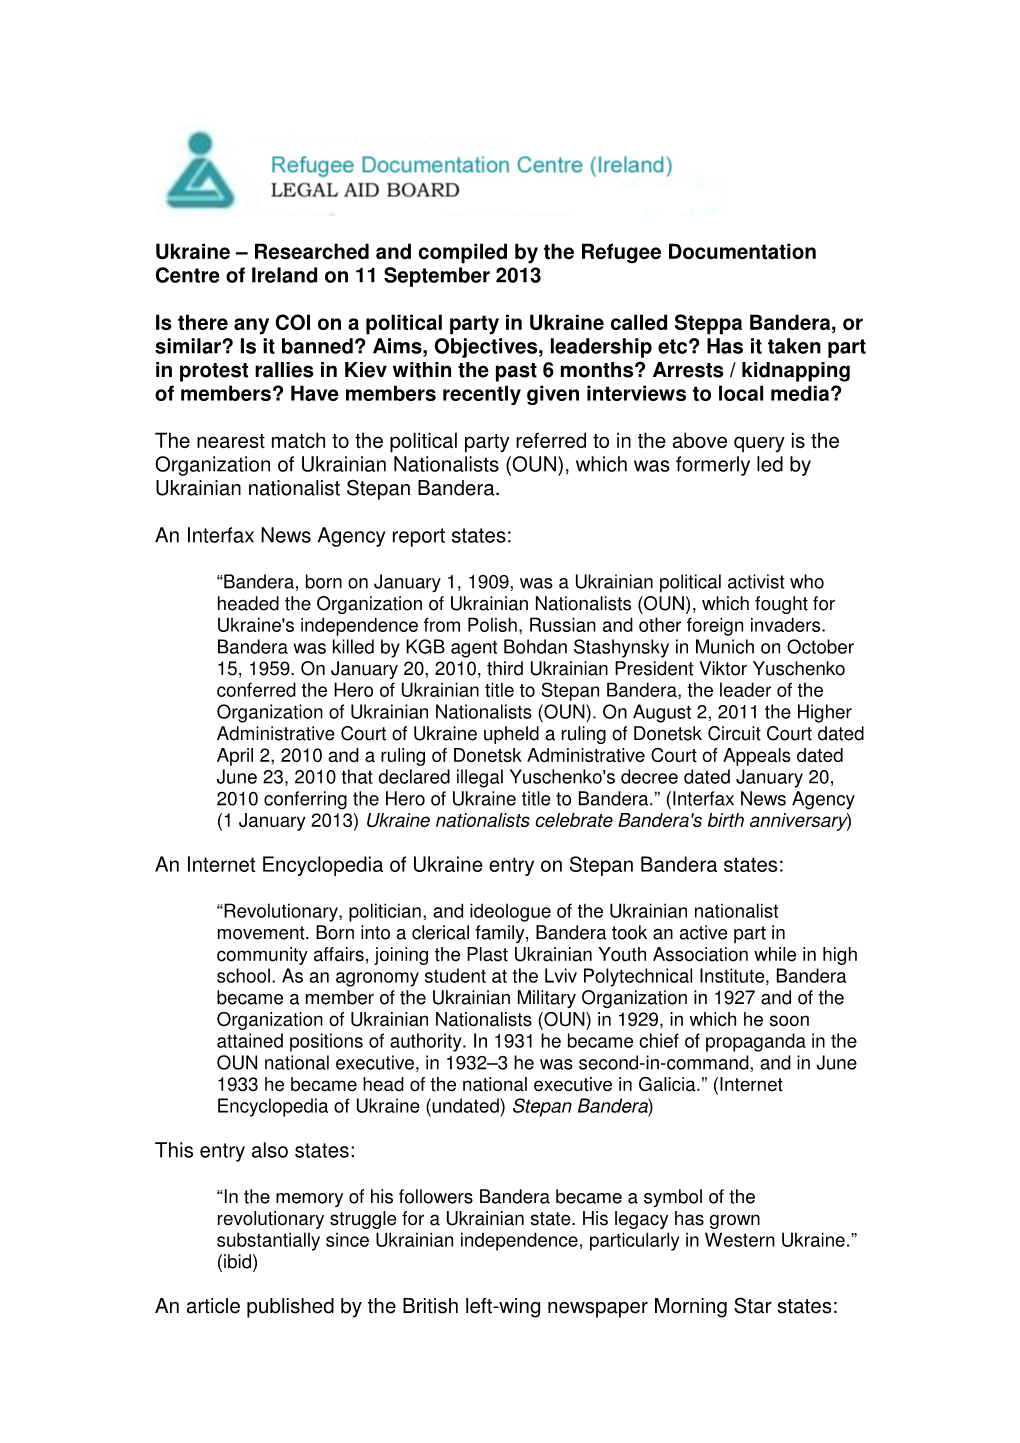 Researched and Compiled by the Refugee Documentation Centre of Ireland on 11 September 2013